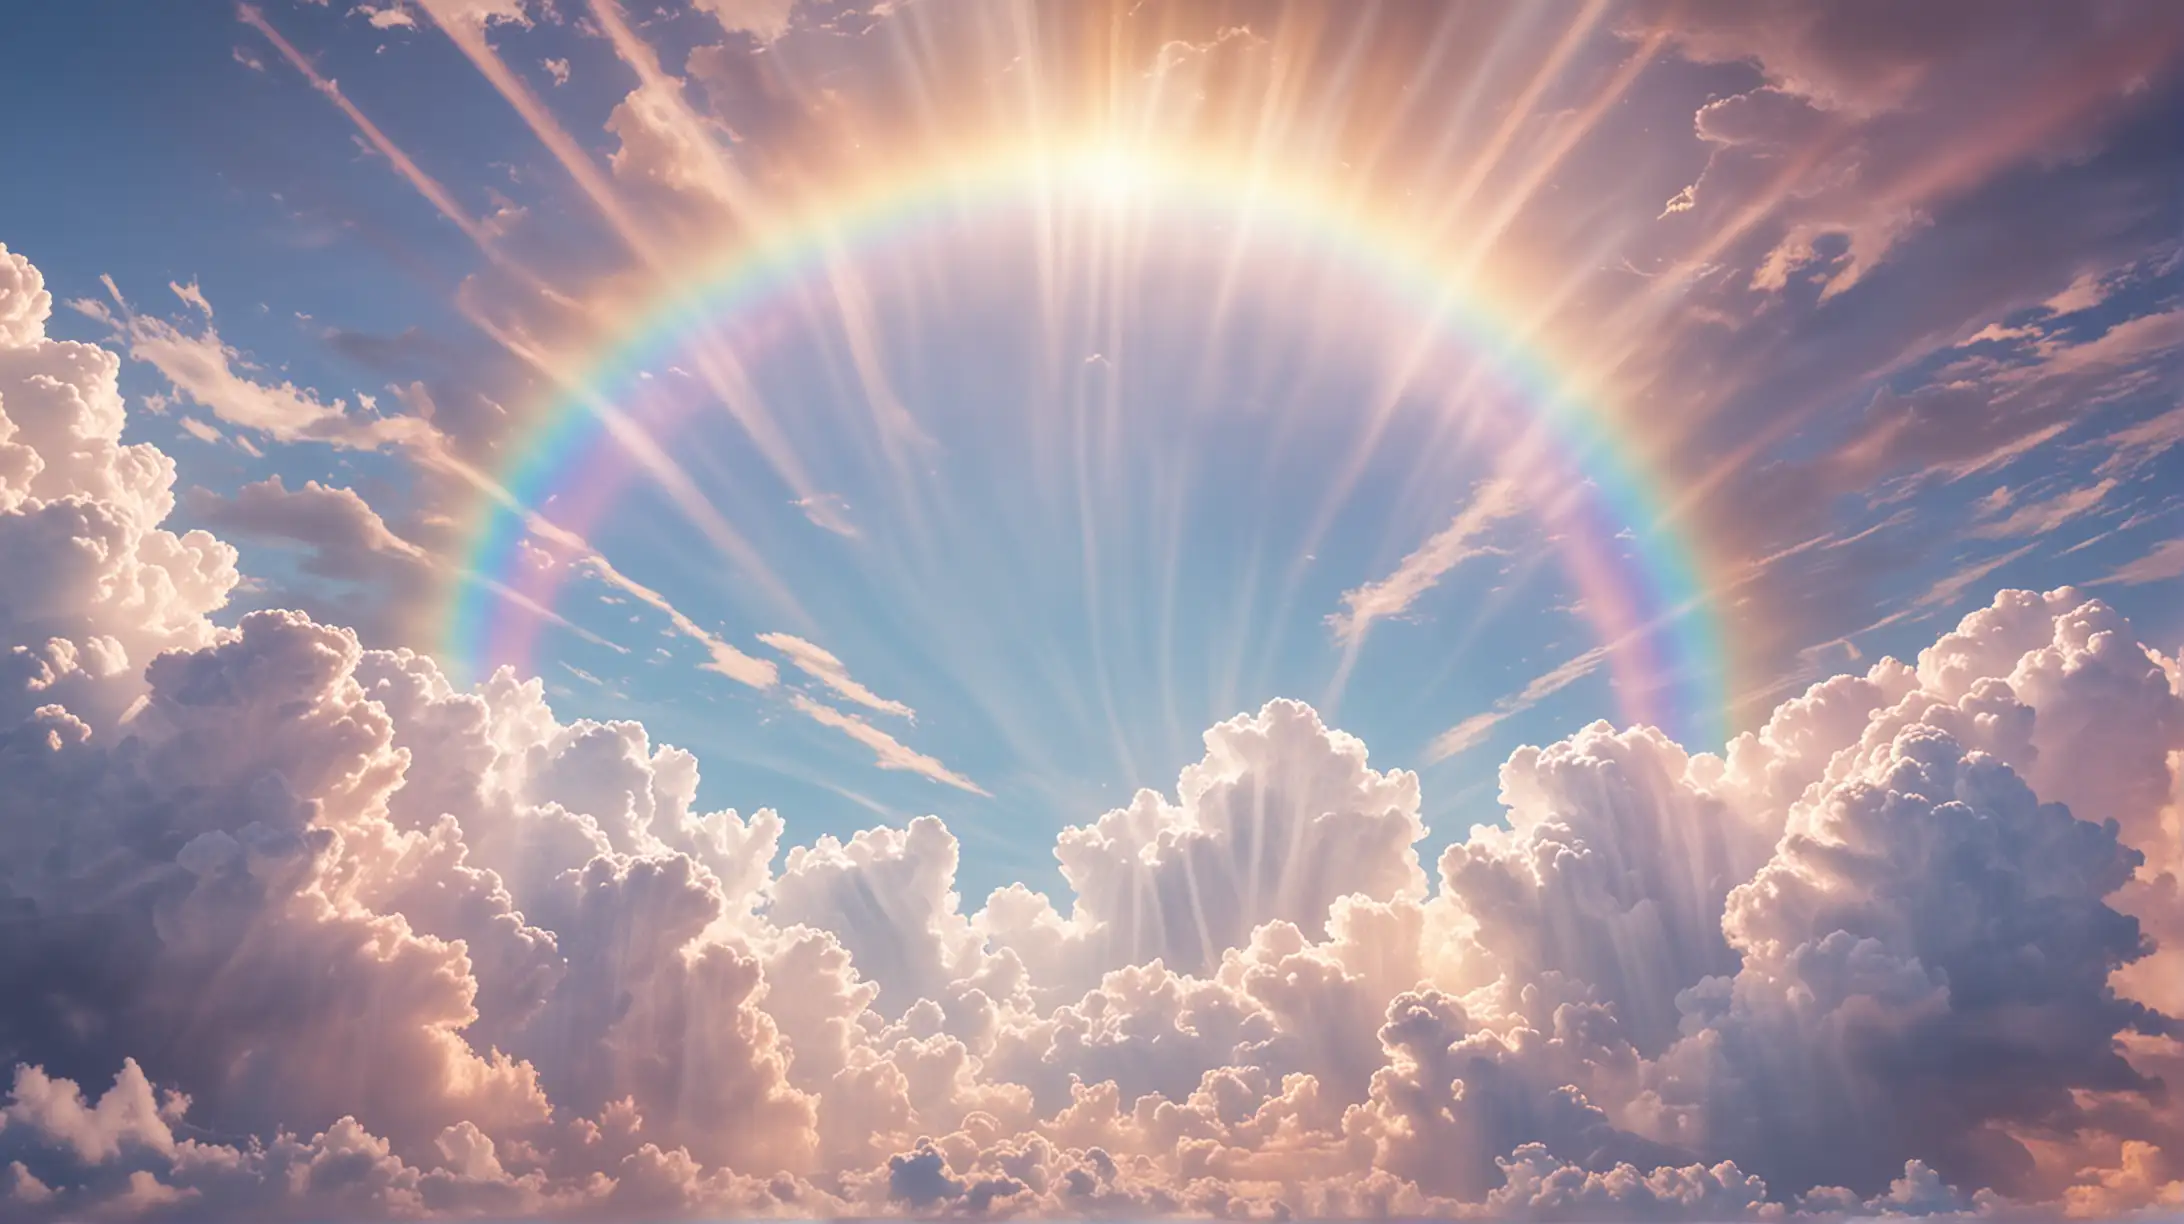 Tranquil Pastel Rainbow Sky with Fluffy Clouds and Sunbeam